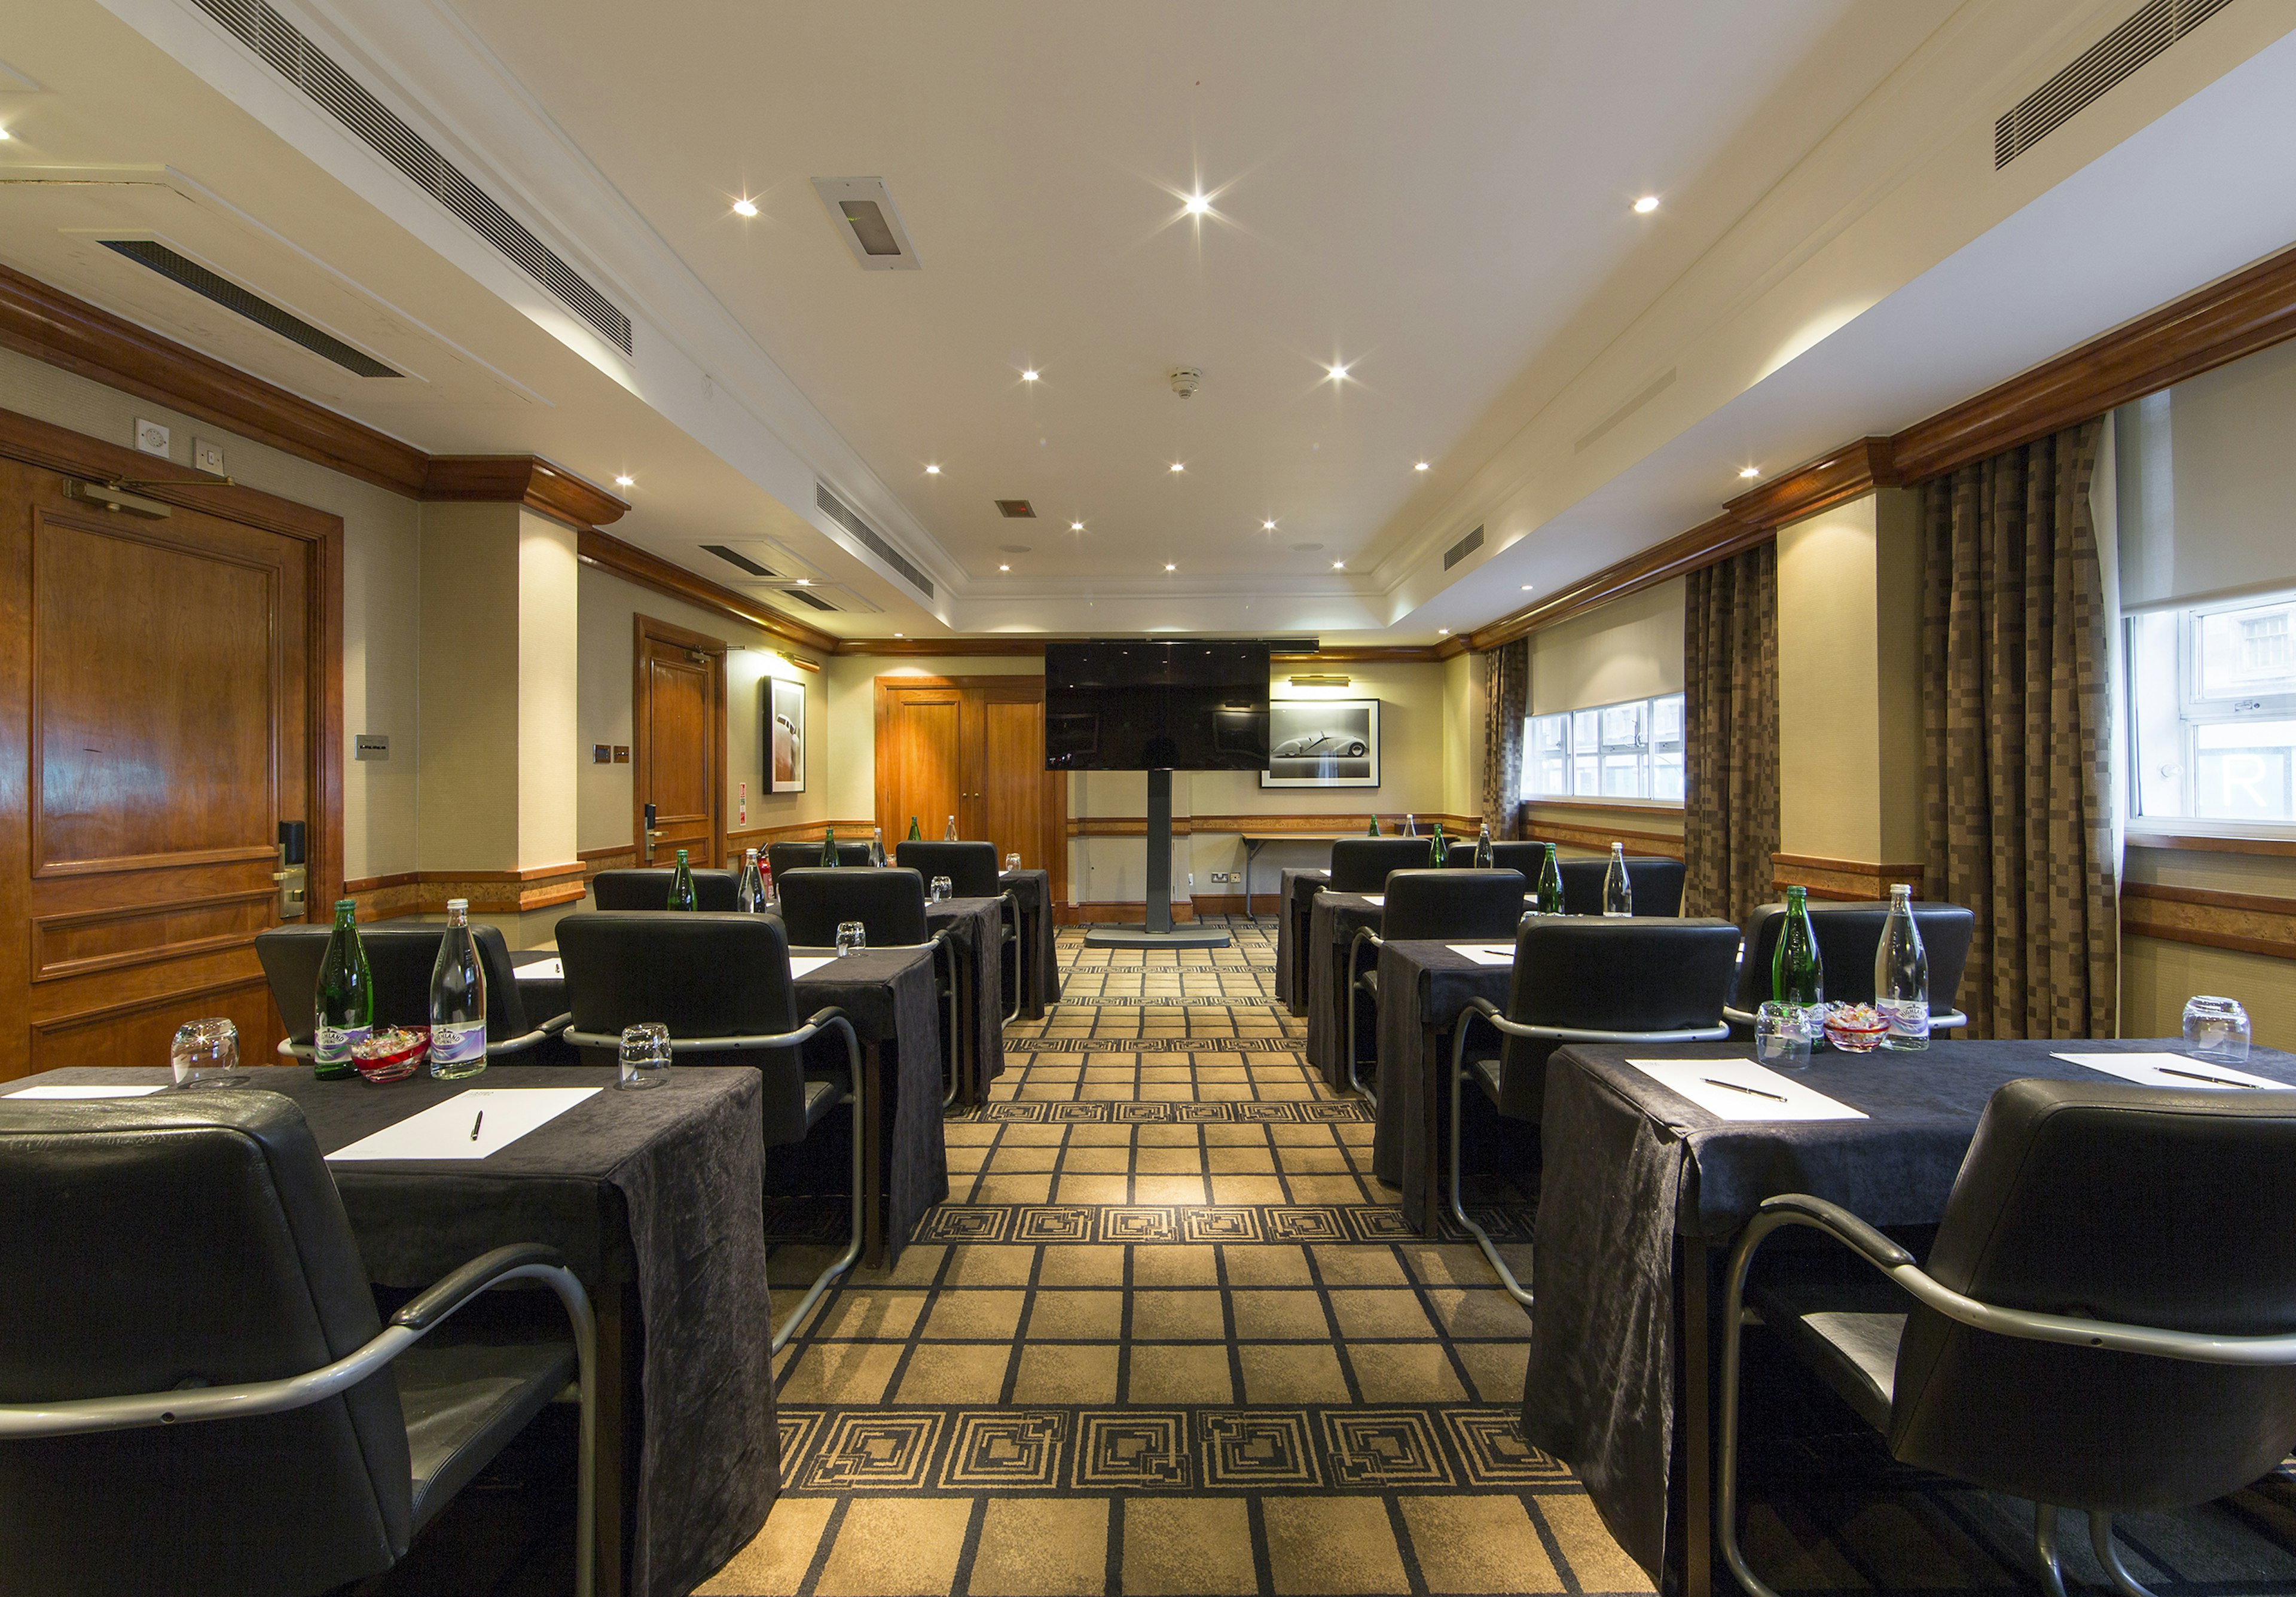 Business - Amba Hotel Marble Arch